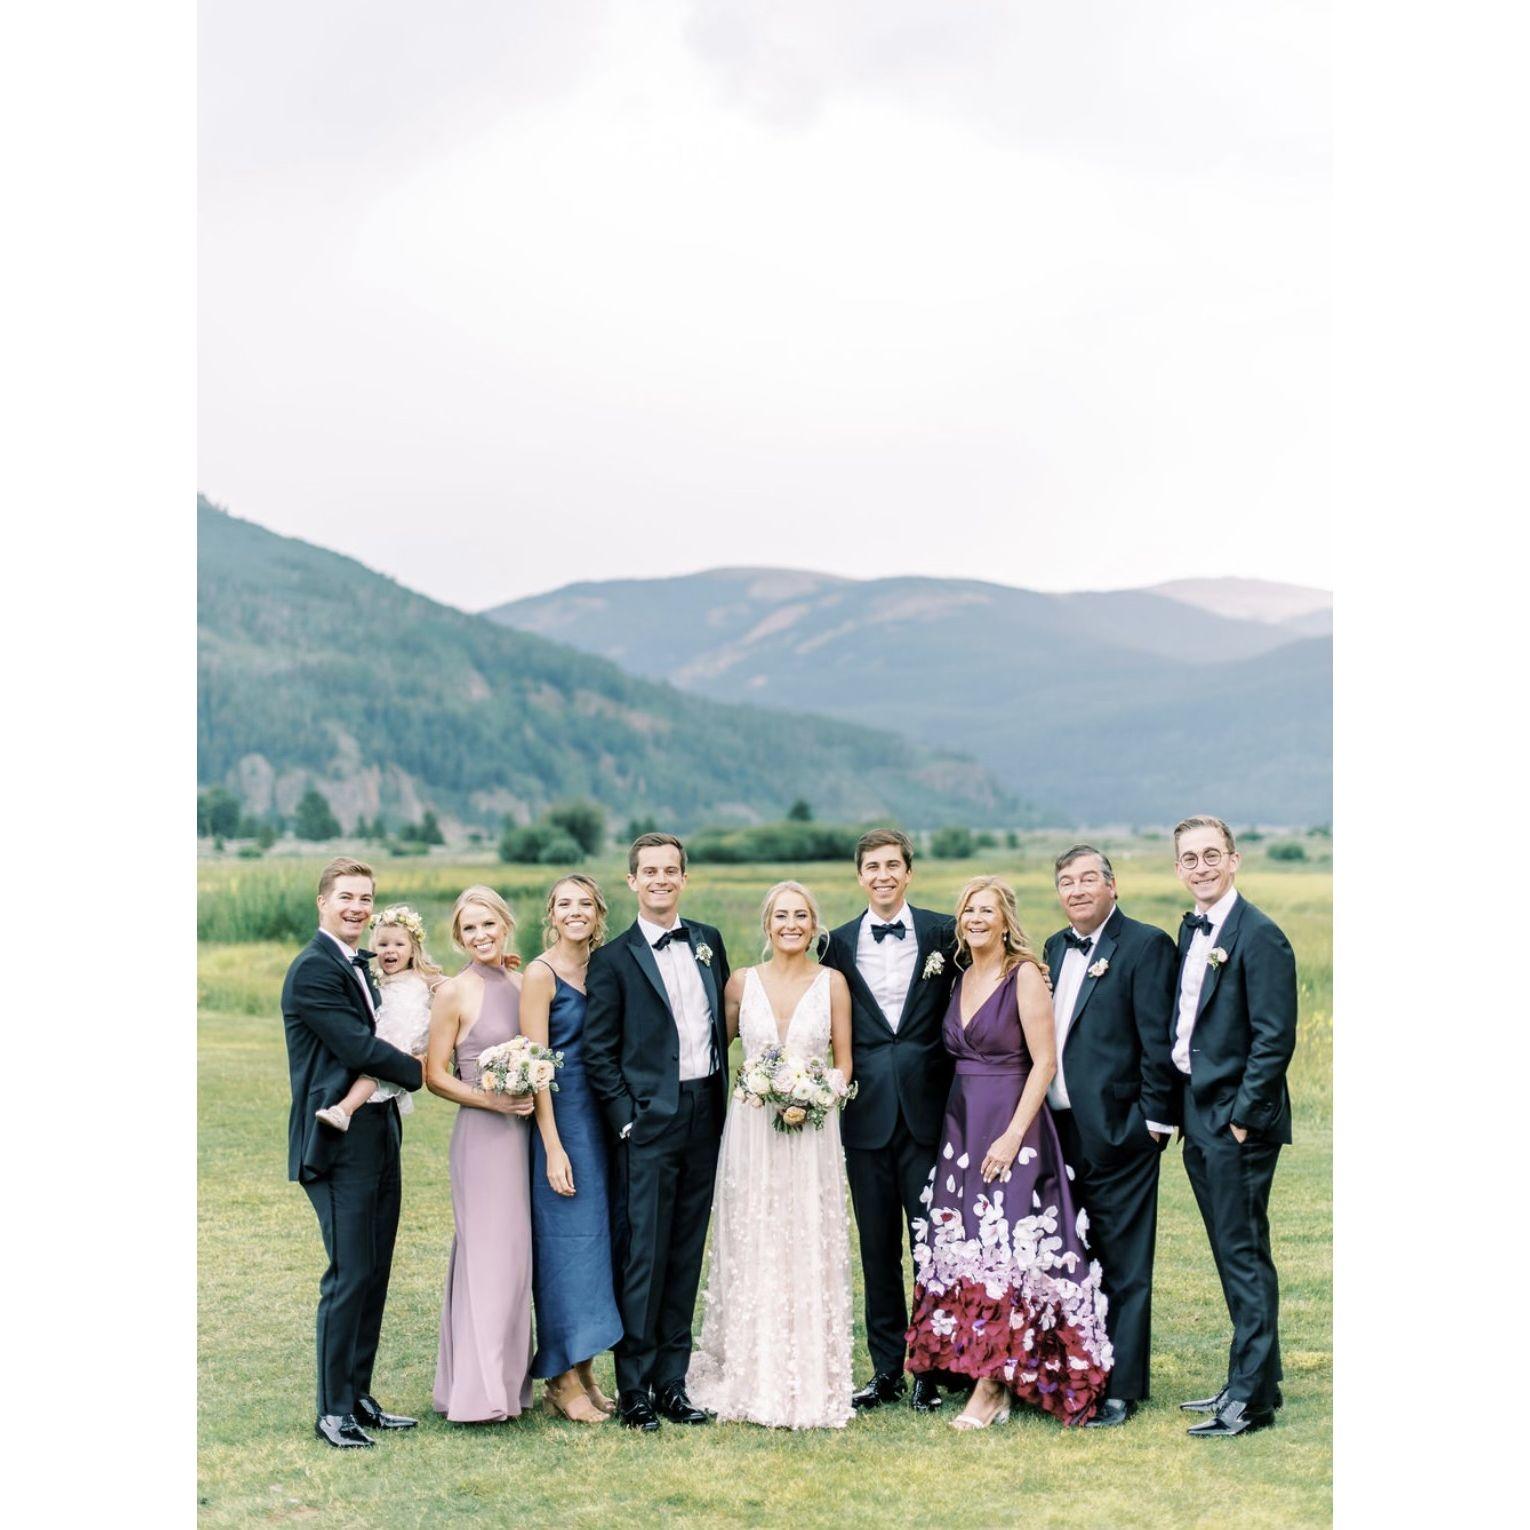 August 2021 - Luke's family at his brother Hank and sister-in-law Megan's wedding in Colorado 